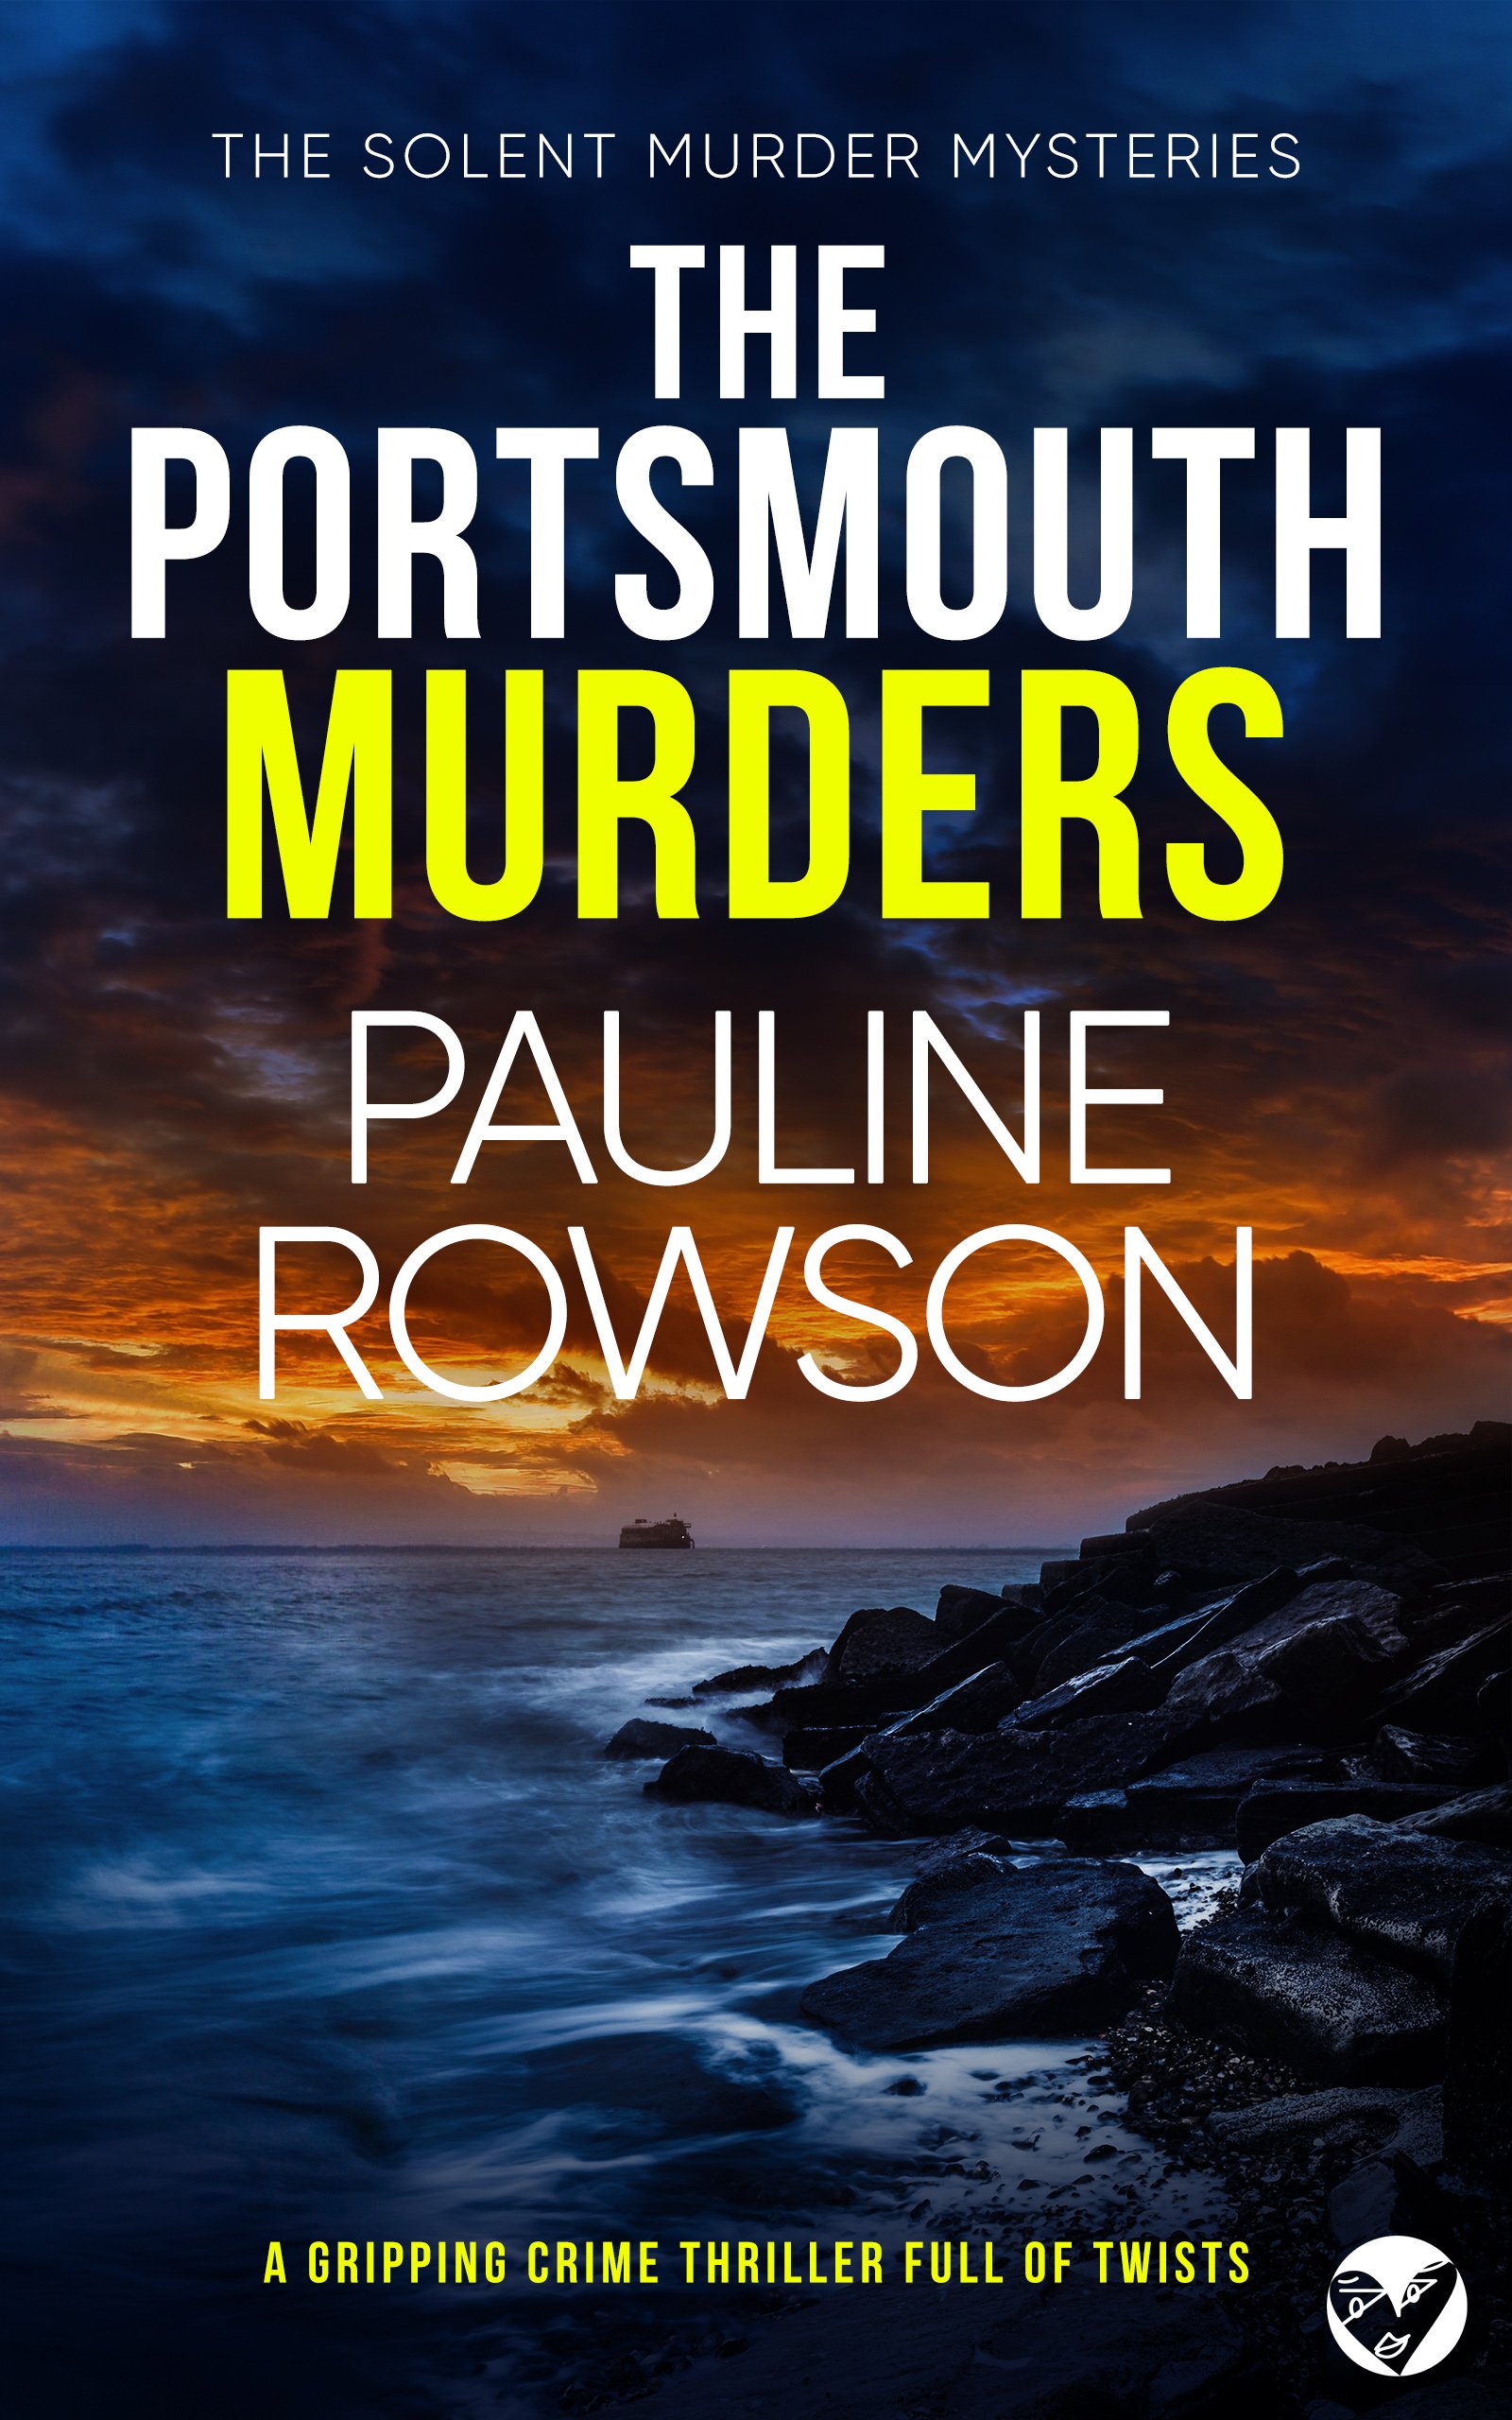 THE PORTSMOUTH MURDERS Cover publish.jpg